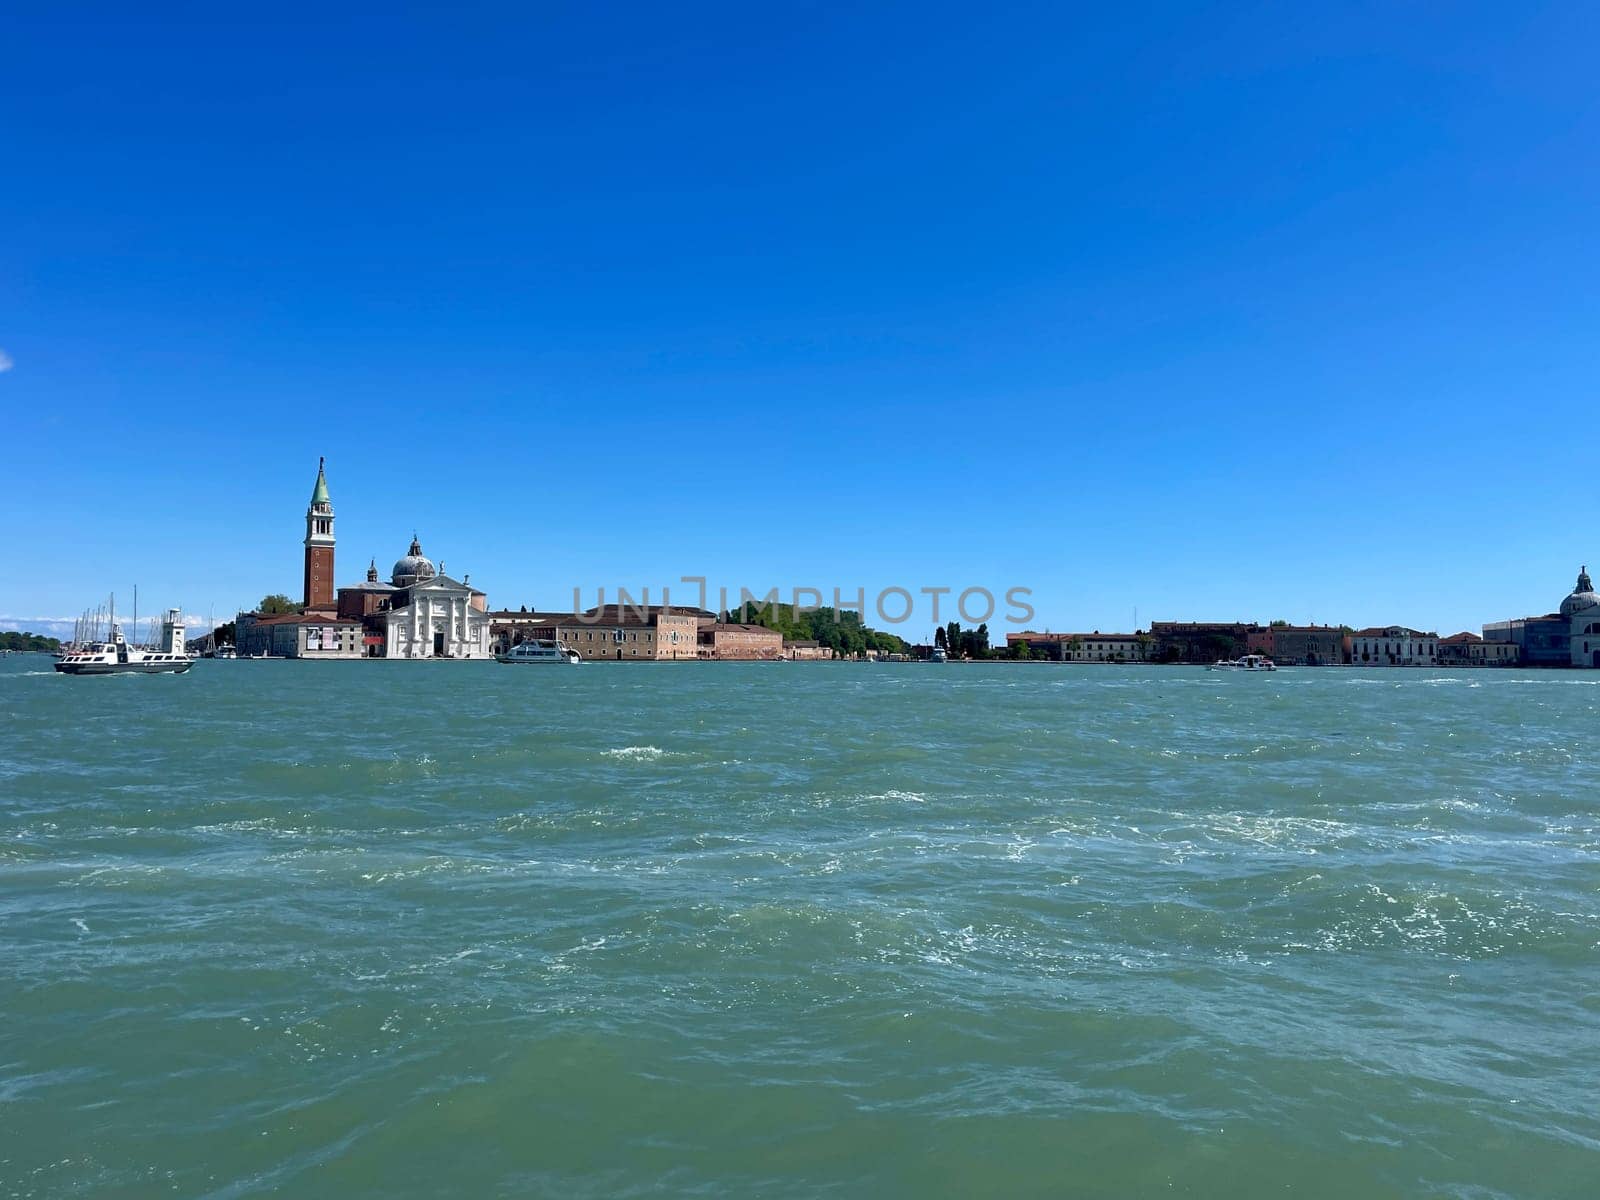 San Giorgio Maggiore is one of the most famous islands in the Venetian lagoon by MilaLazo